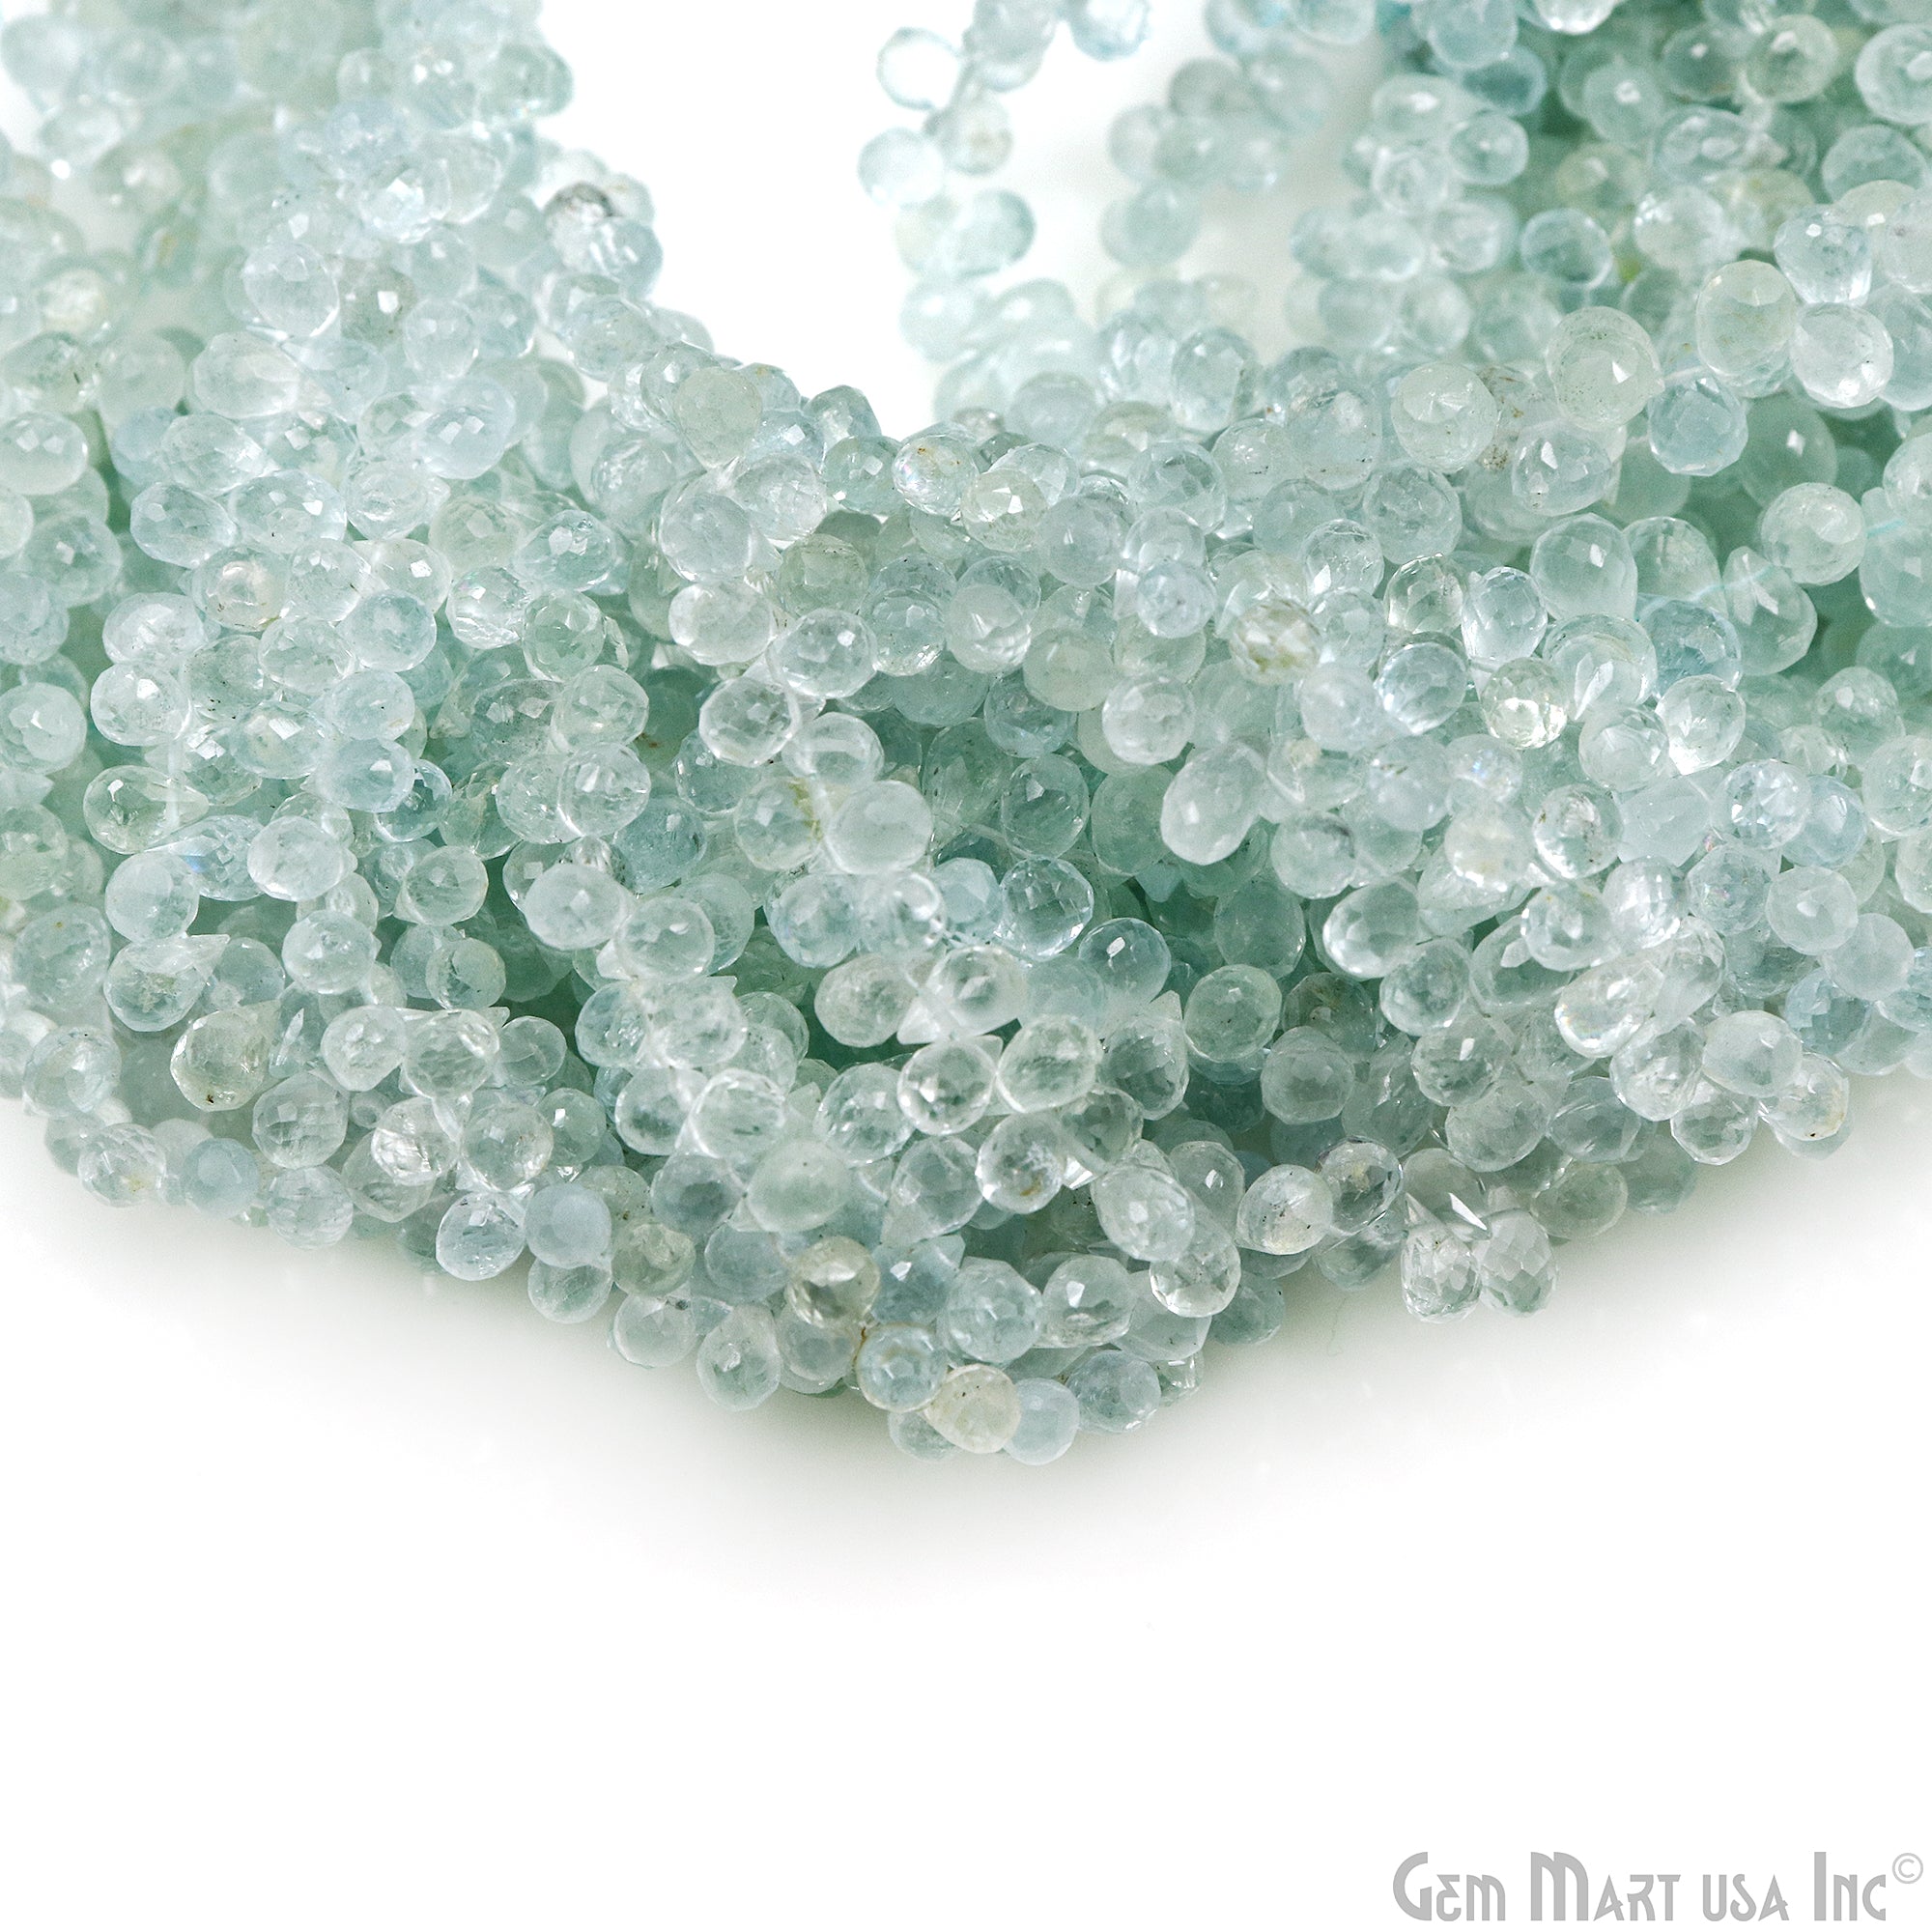 Aquamarine Faceted Drops 6x4mm Gemstone Rondelle Beads Jewelry Making Supplies 9 INCH